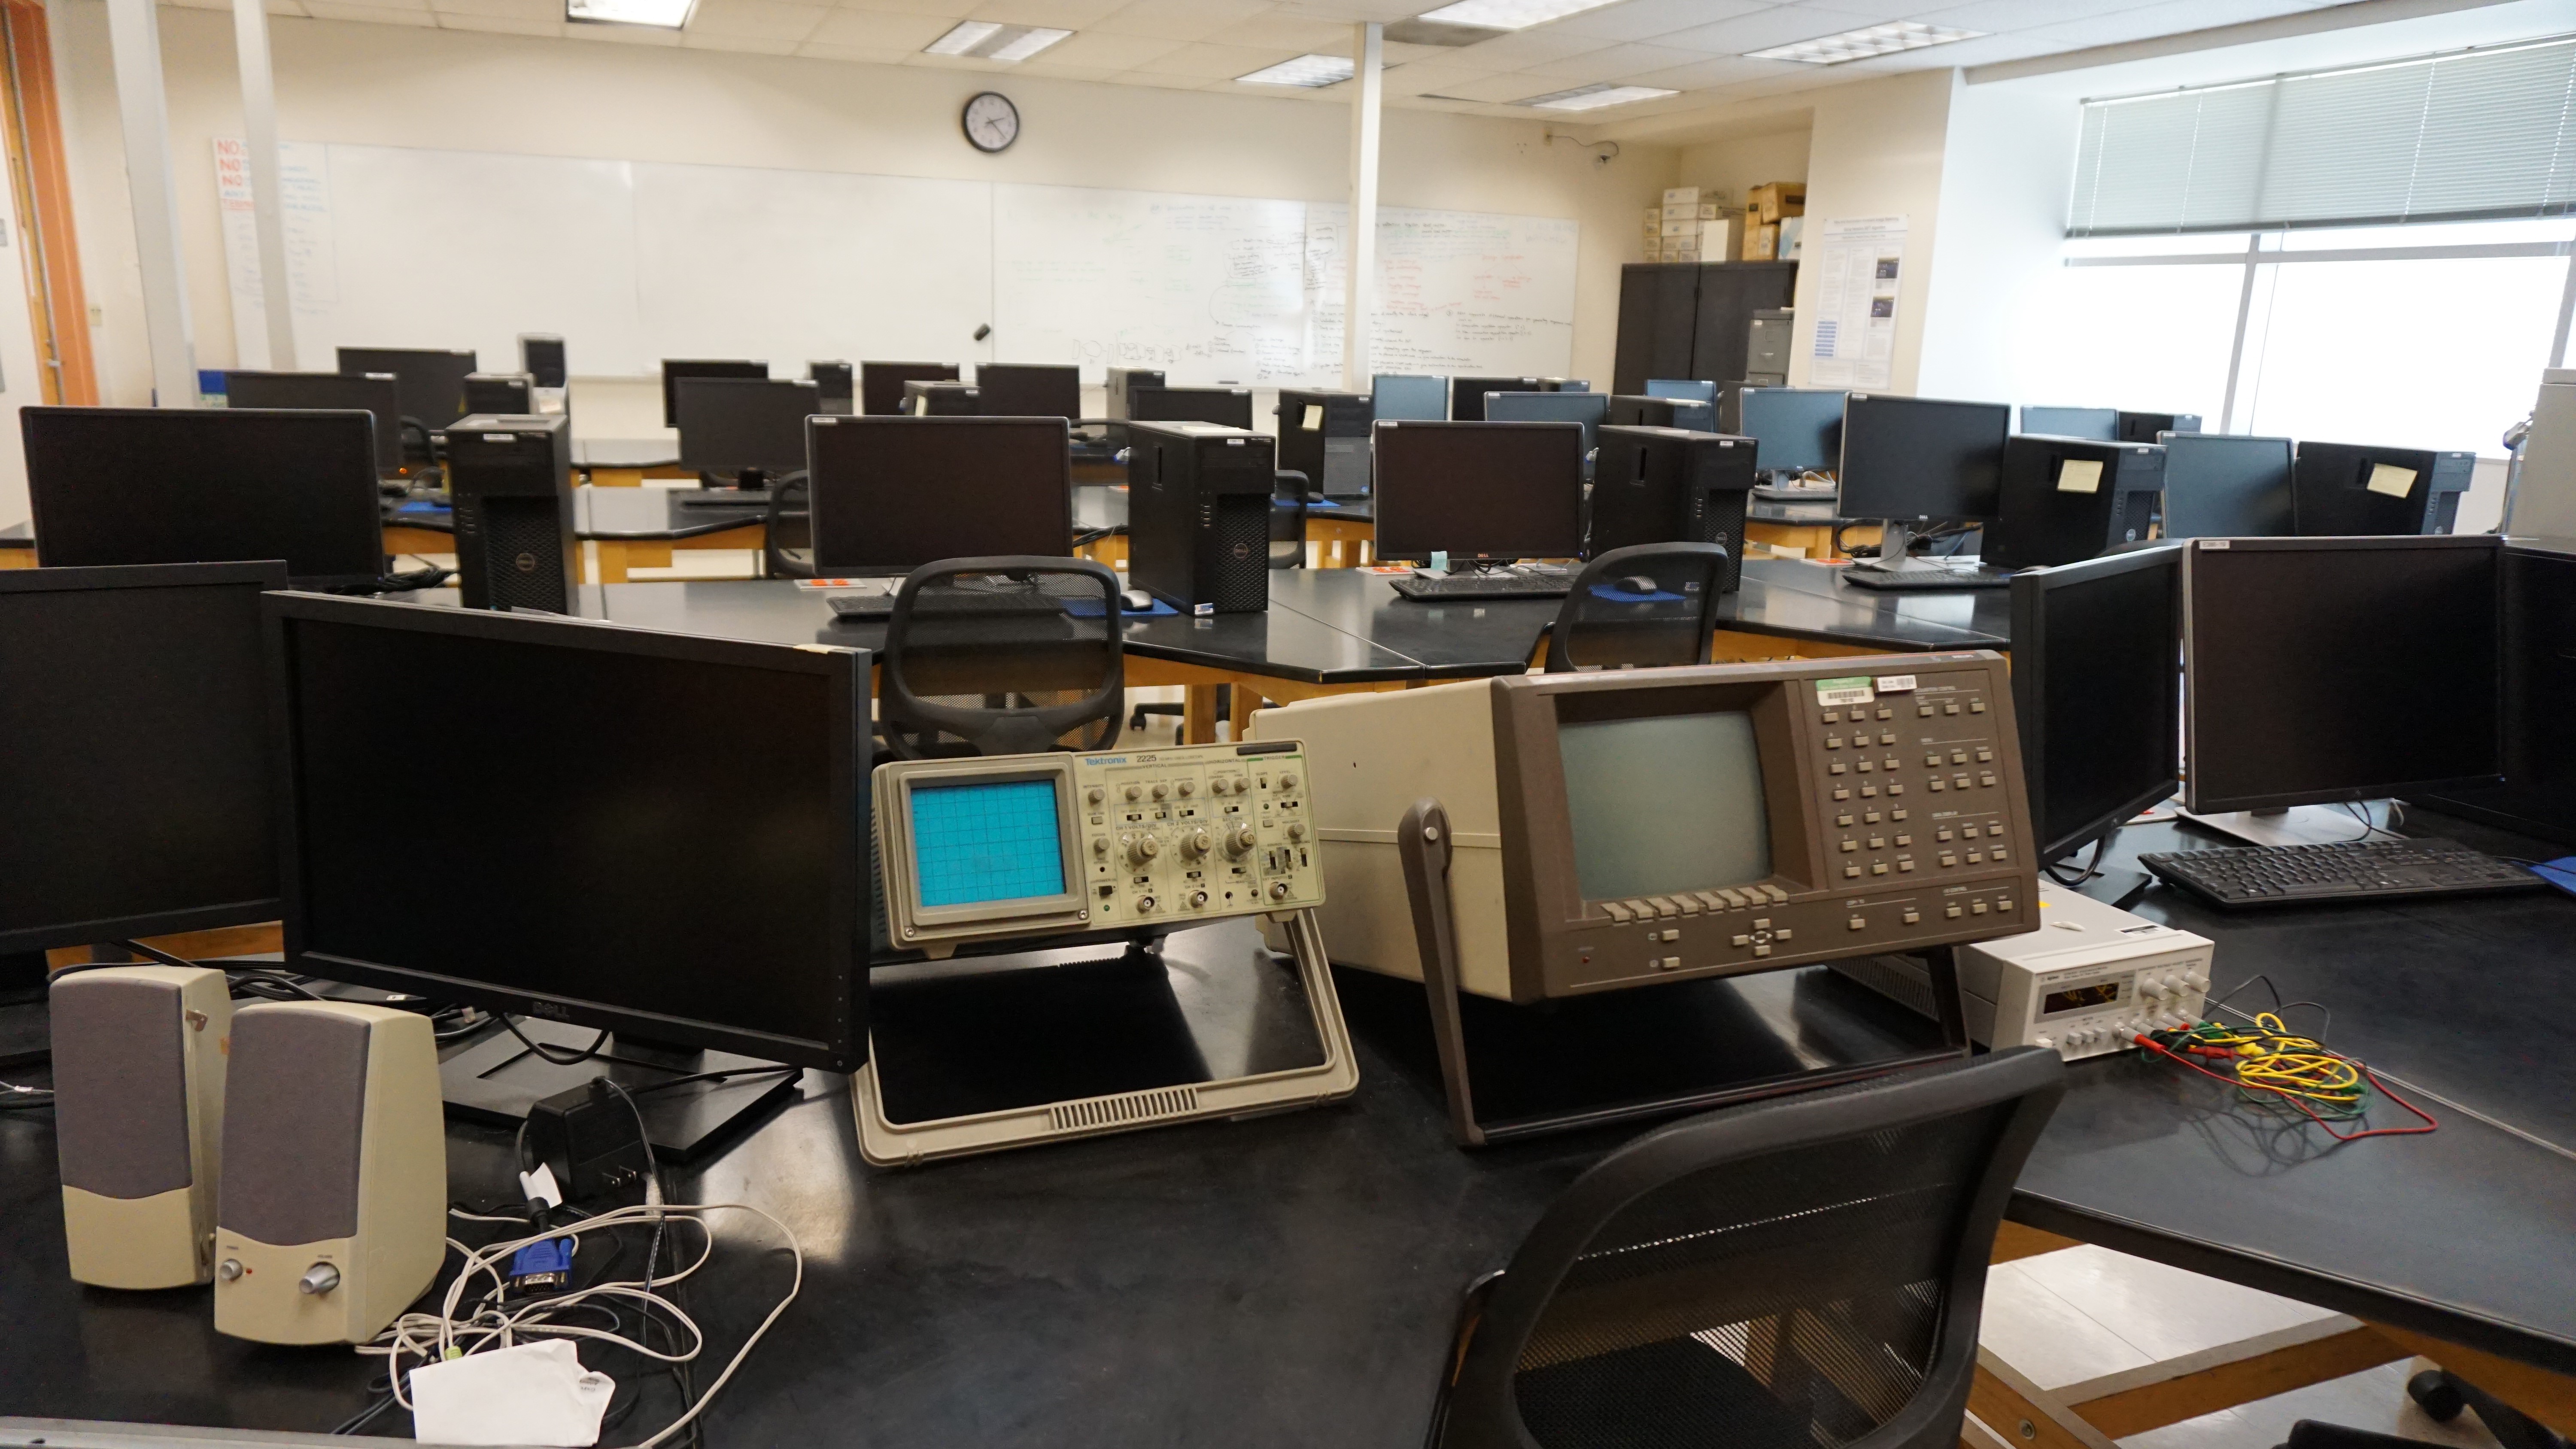 Rows of black monitors and a small bright blue screen on one of the lab machines.